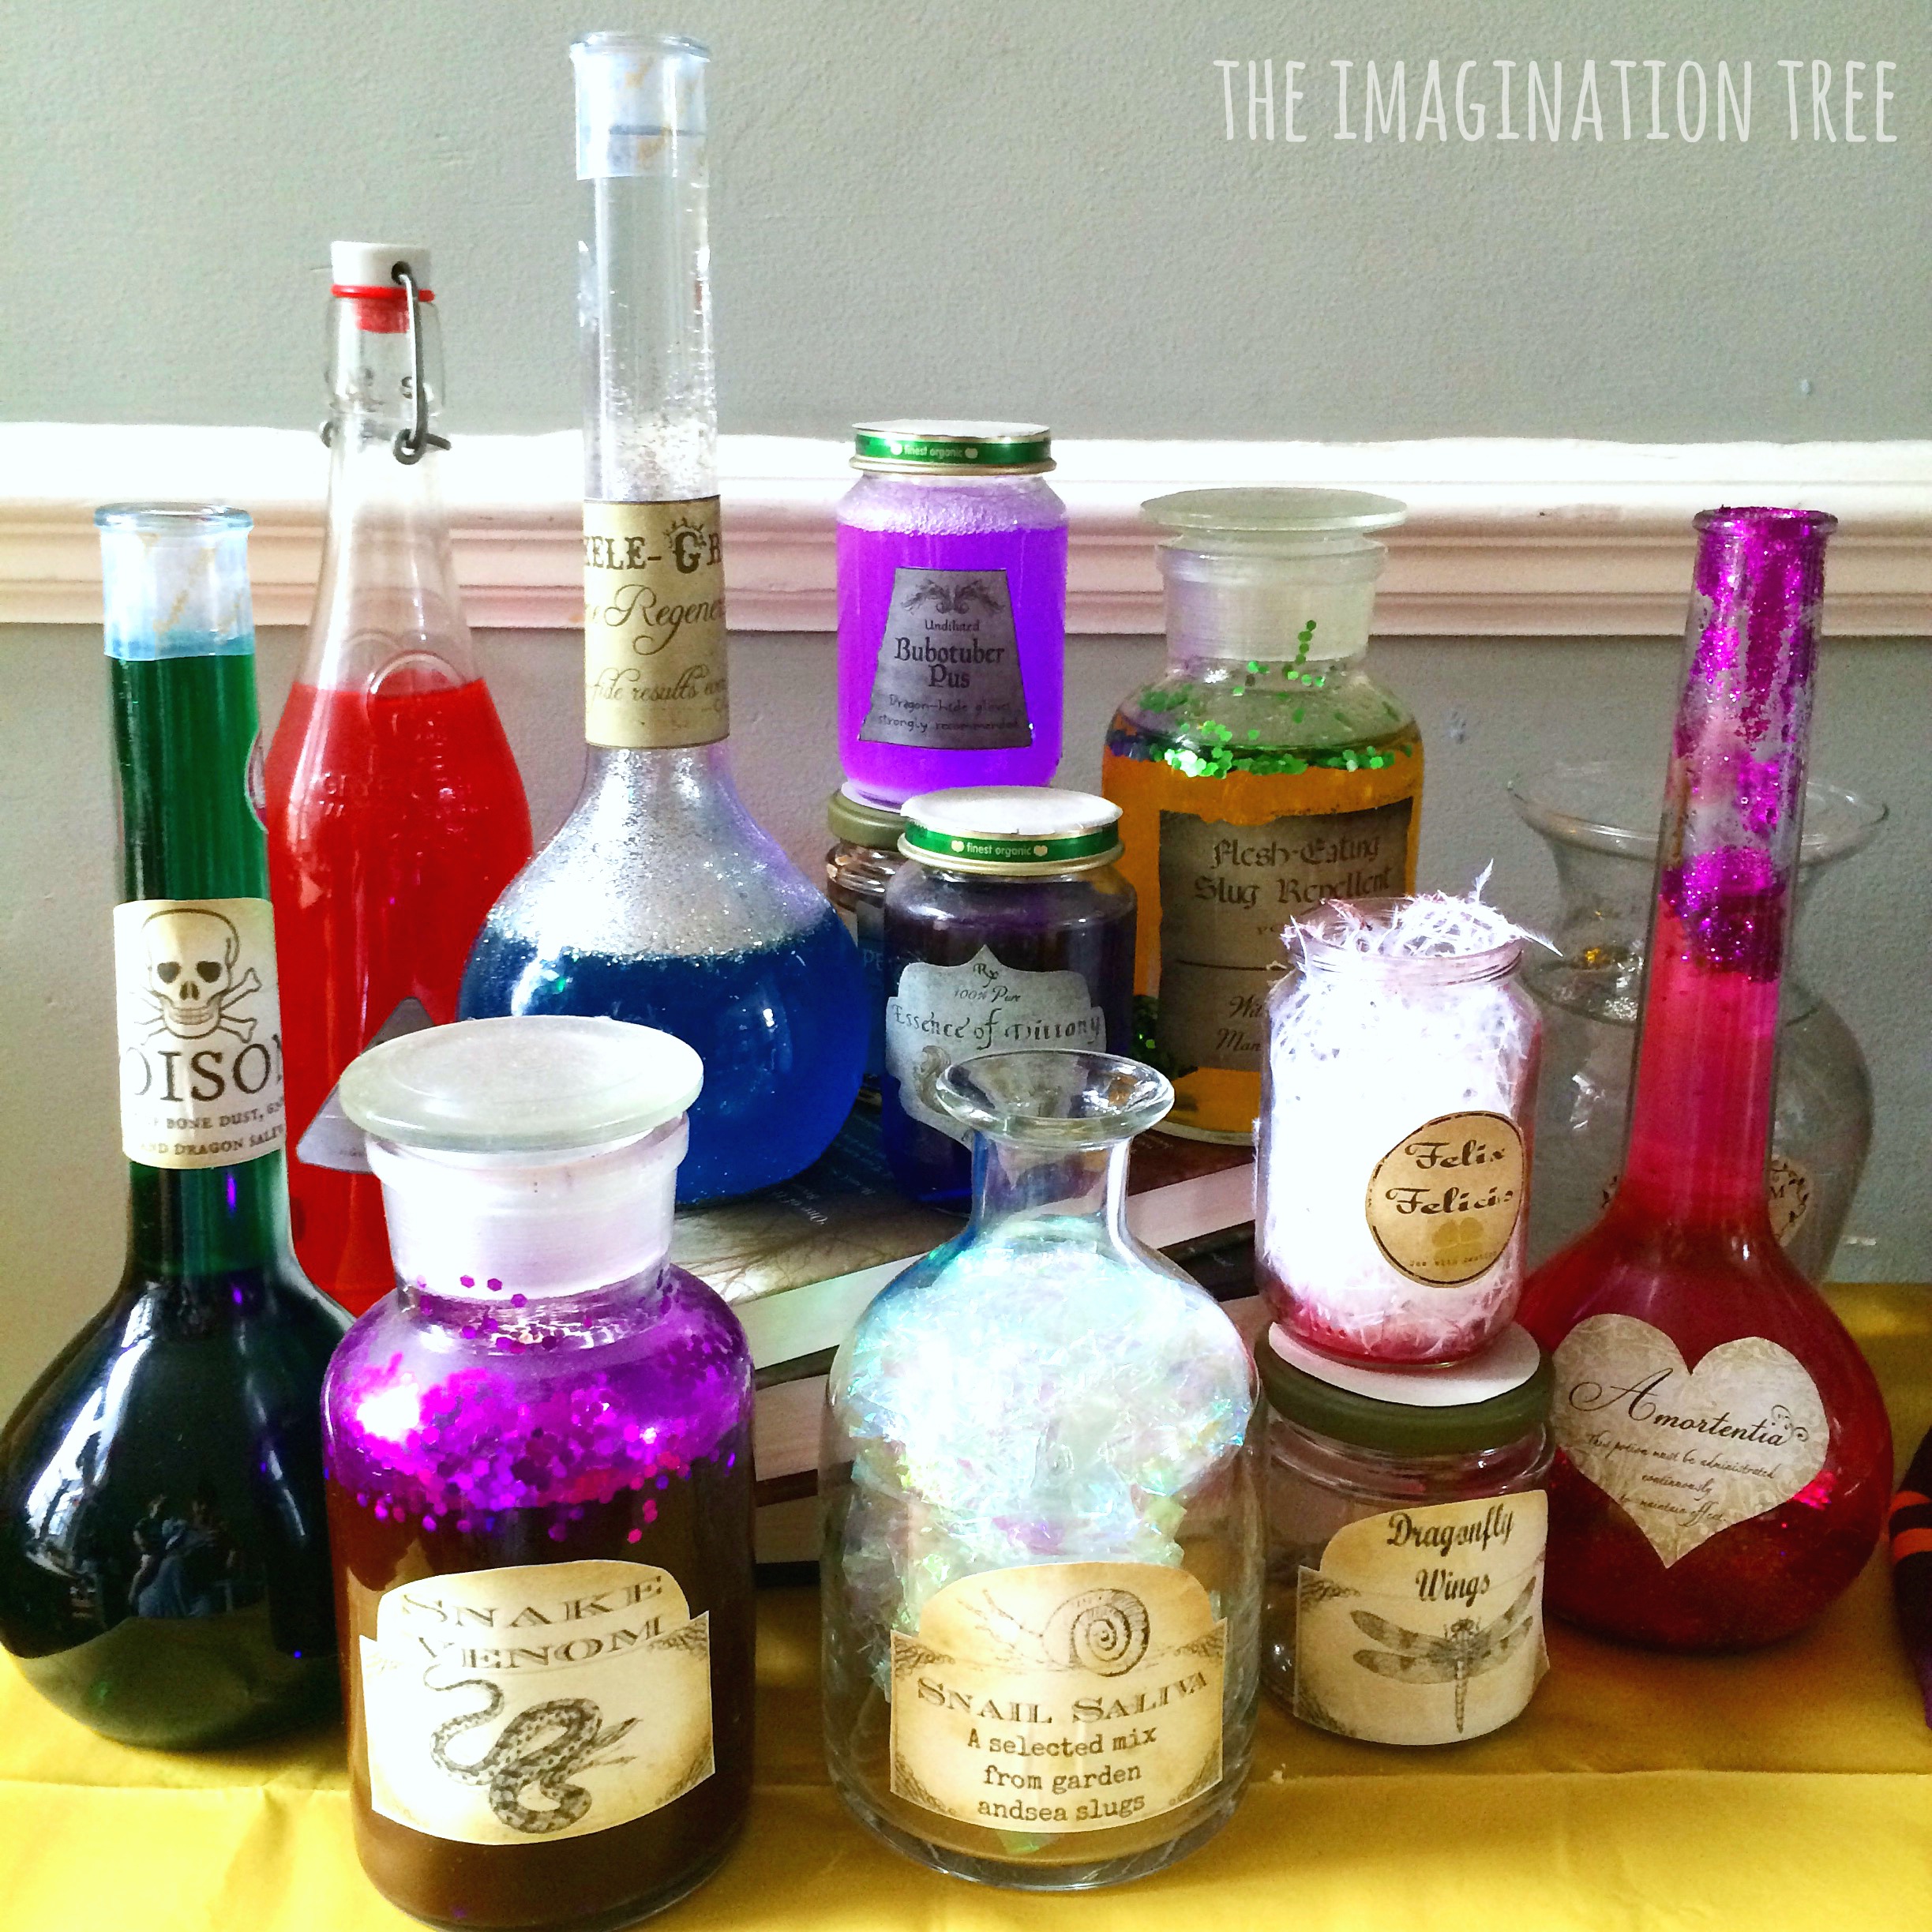 Harry Potter Potions Class Science Activity The Imagination Tree